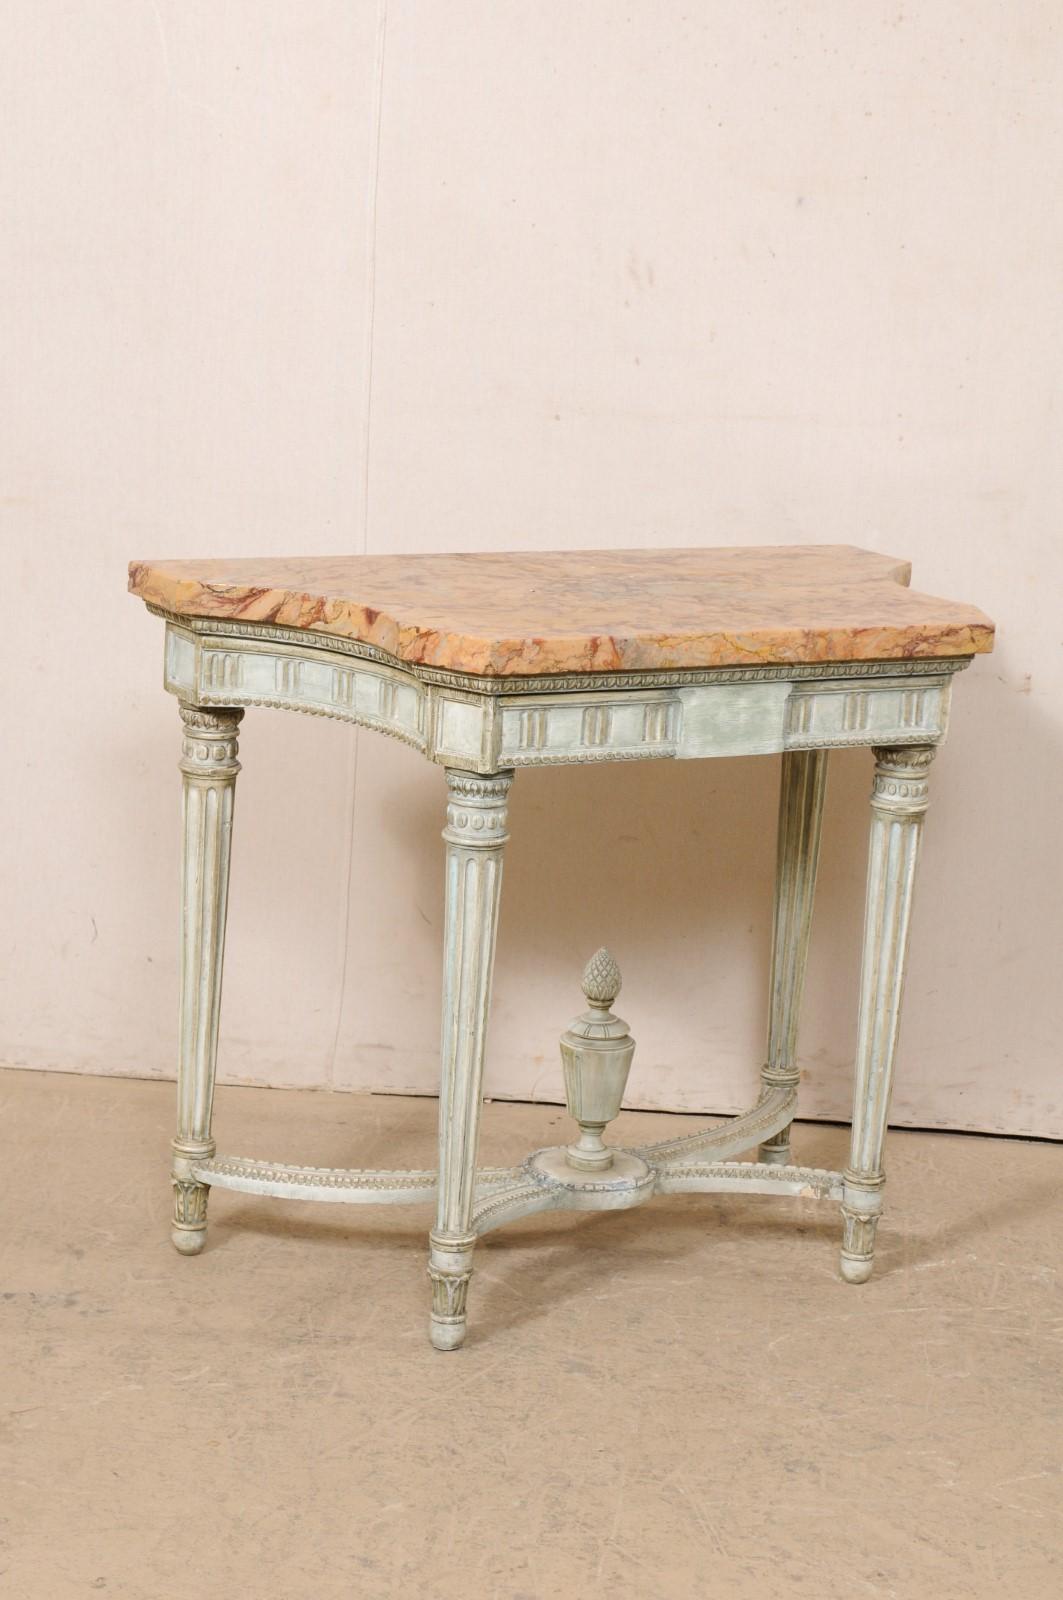 A French Neoclassical console table with its original marble top from the early 19th century. This antique table from France retains its original marble top, with a shorter straight mid section at front, which flows nicely to curvy sides, and join